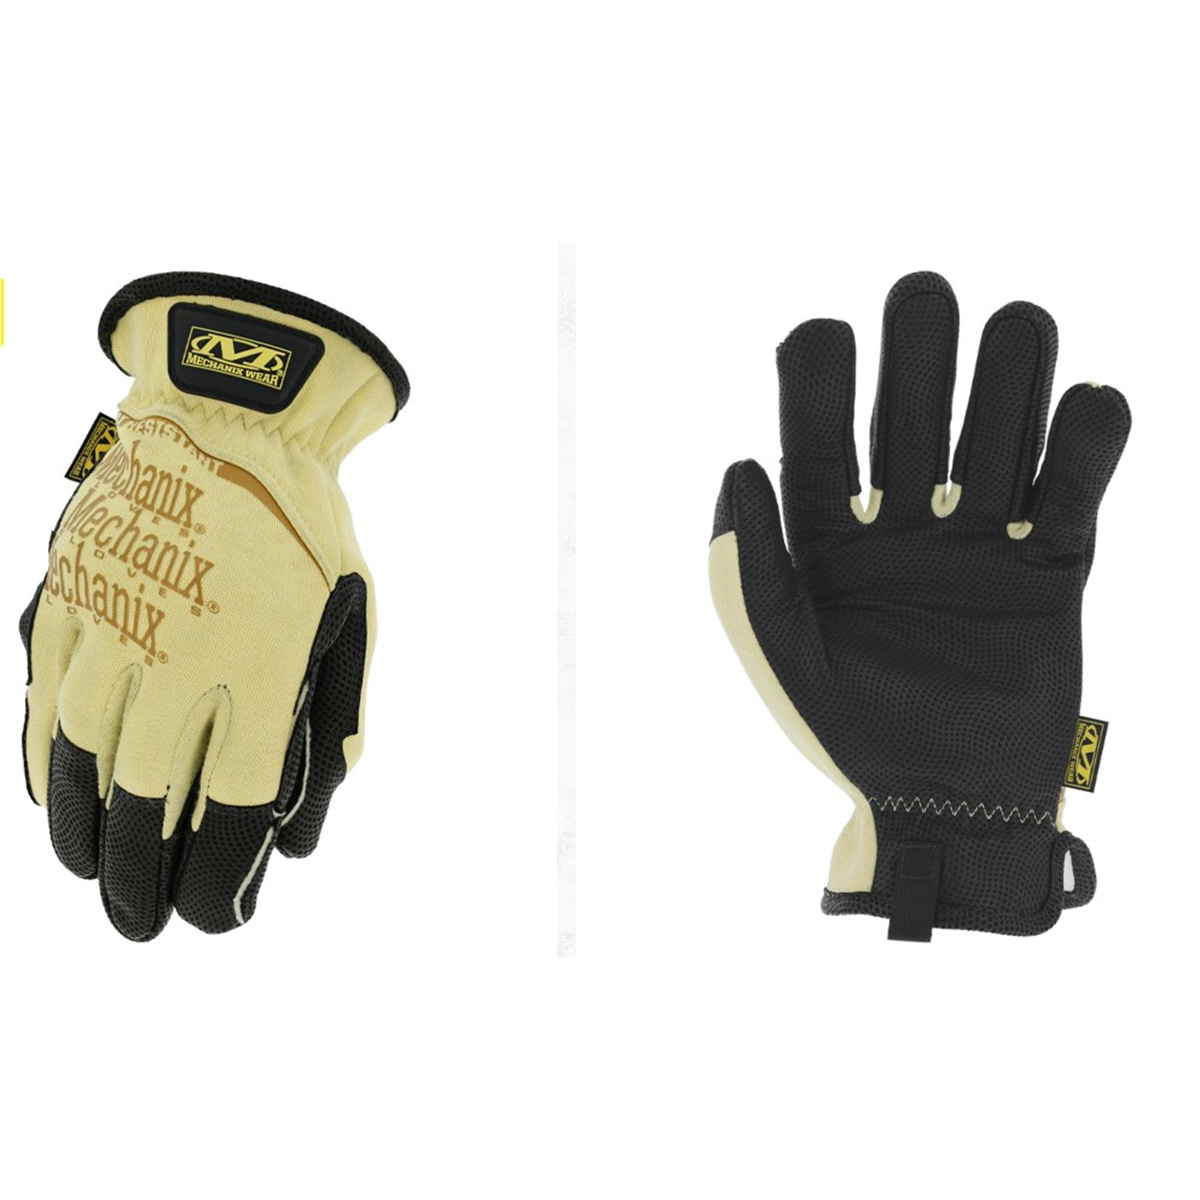 Mechanix Wear: Durahide Leather FastFit Work Glove with Elastic Cuff for  Secure Fit, Utility Gloves for Multi-Purpose Use, Abrasion Resistant,  Safety